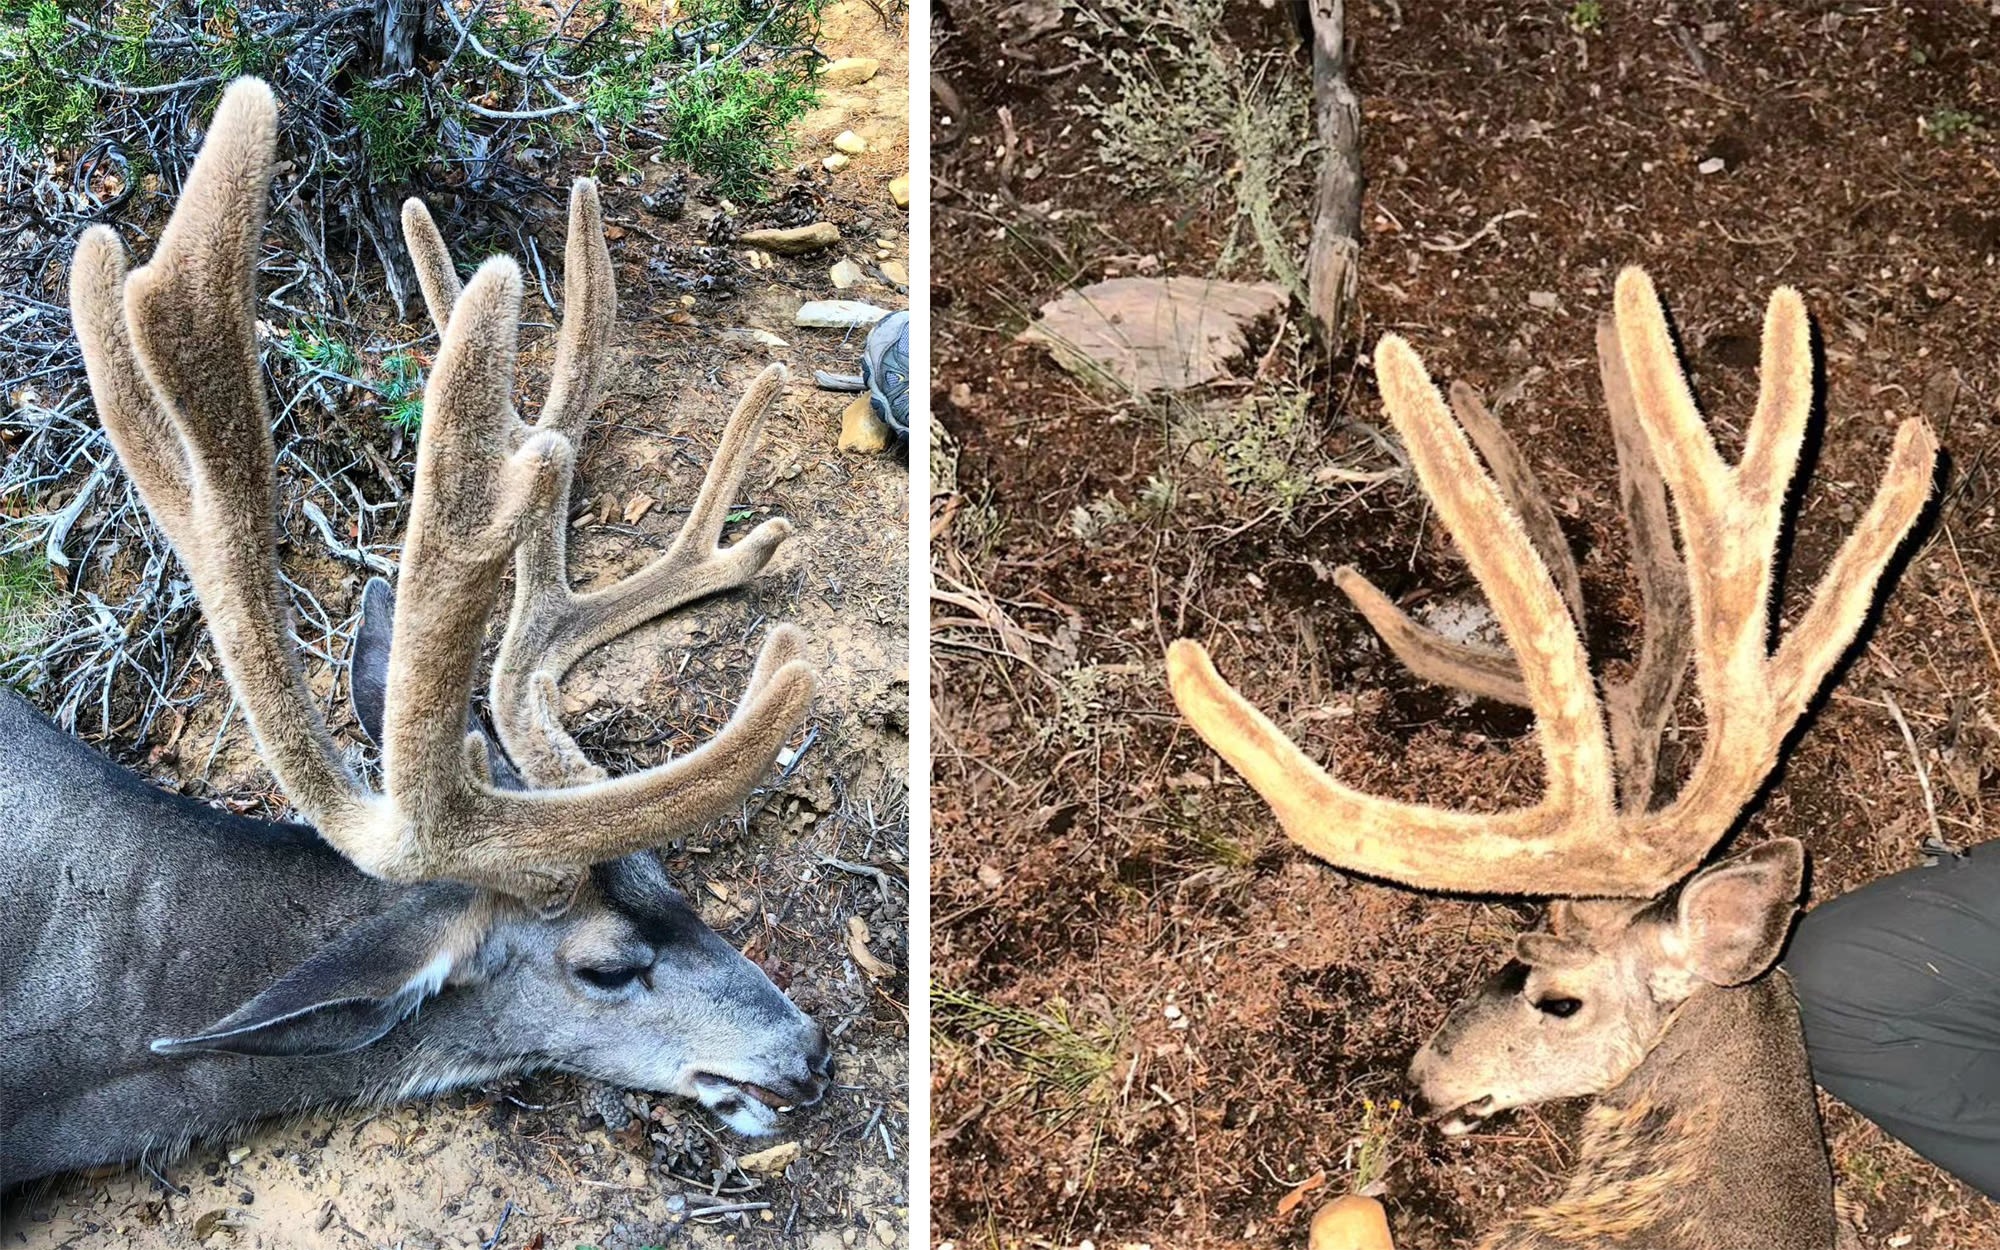 Former Utah Wildlife Commissioner Under Investigation for Baiting Mule Deer on Outfitted Ranch